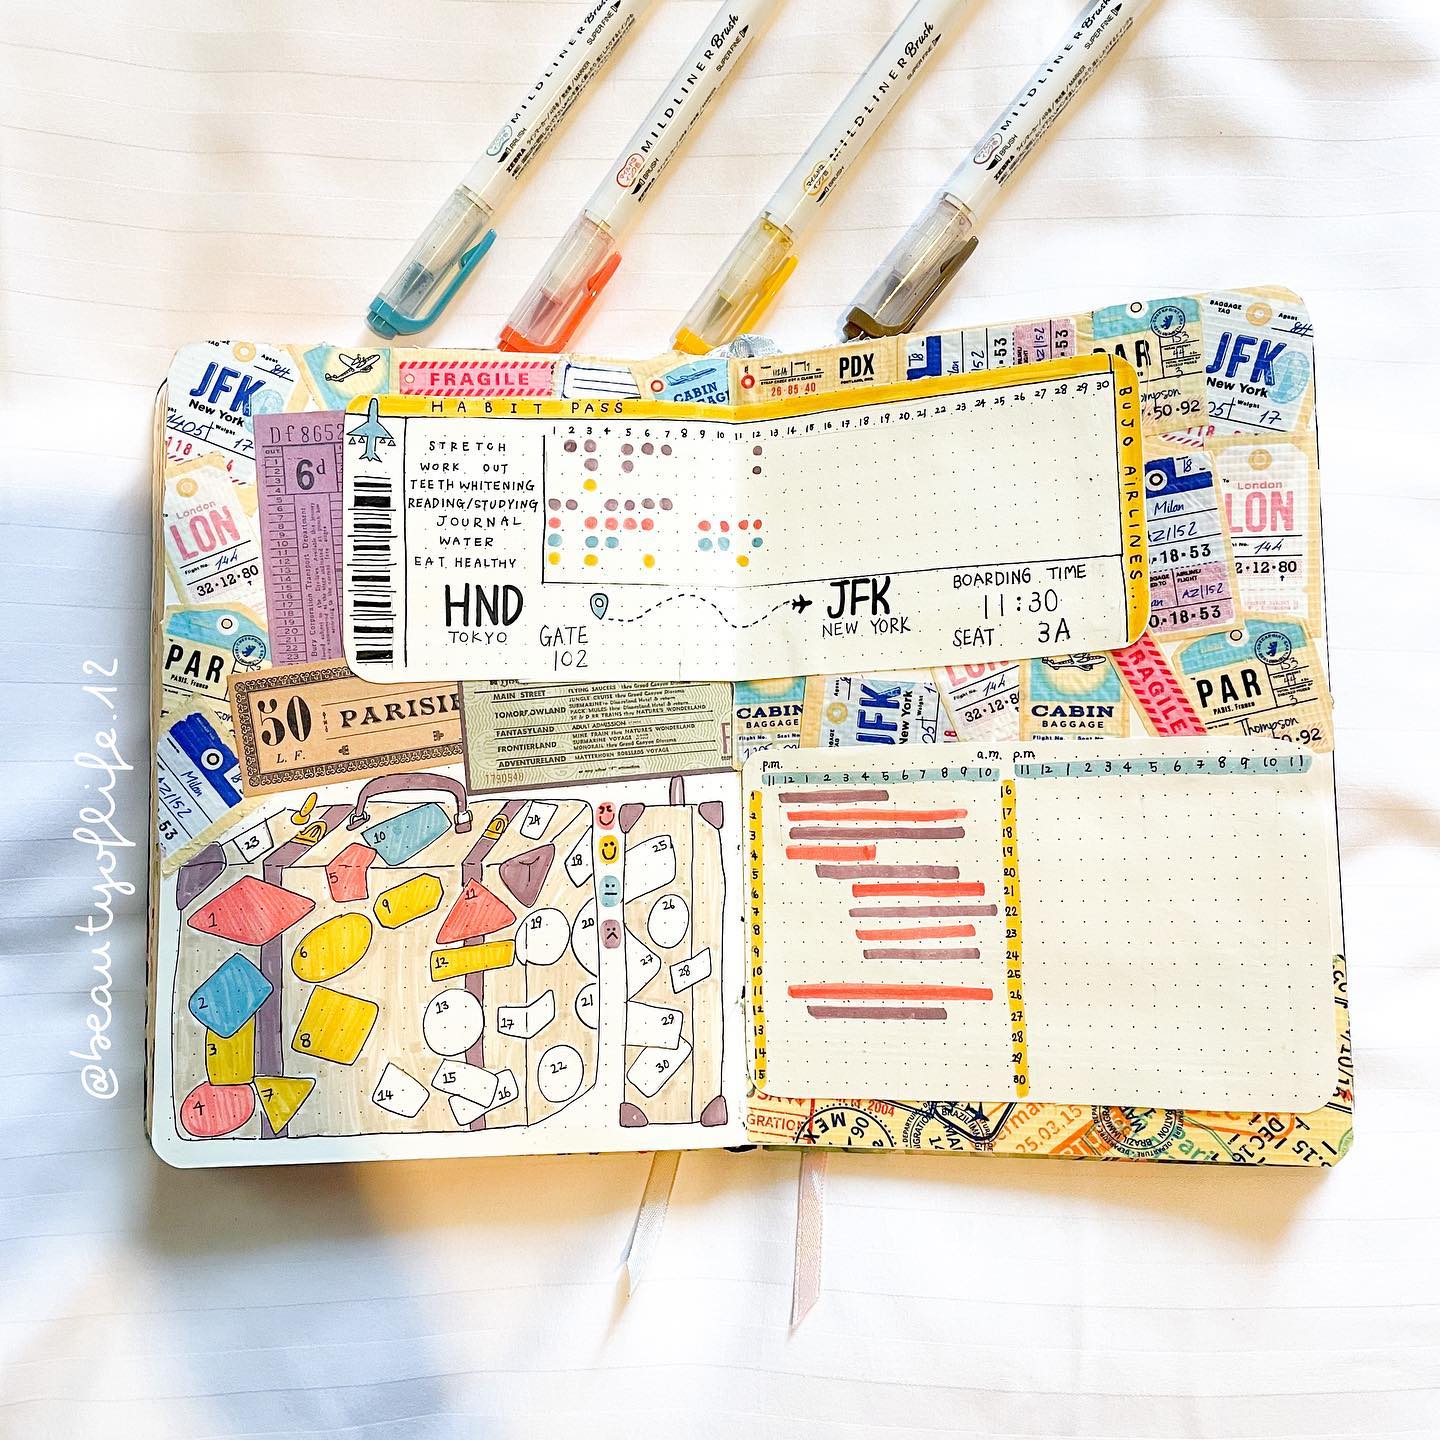 How To Travel With Your Journal Supplies + Travel Packing Spread